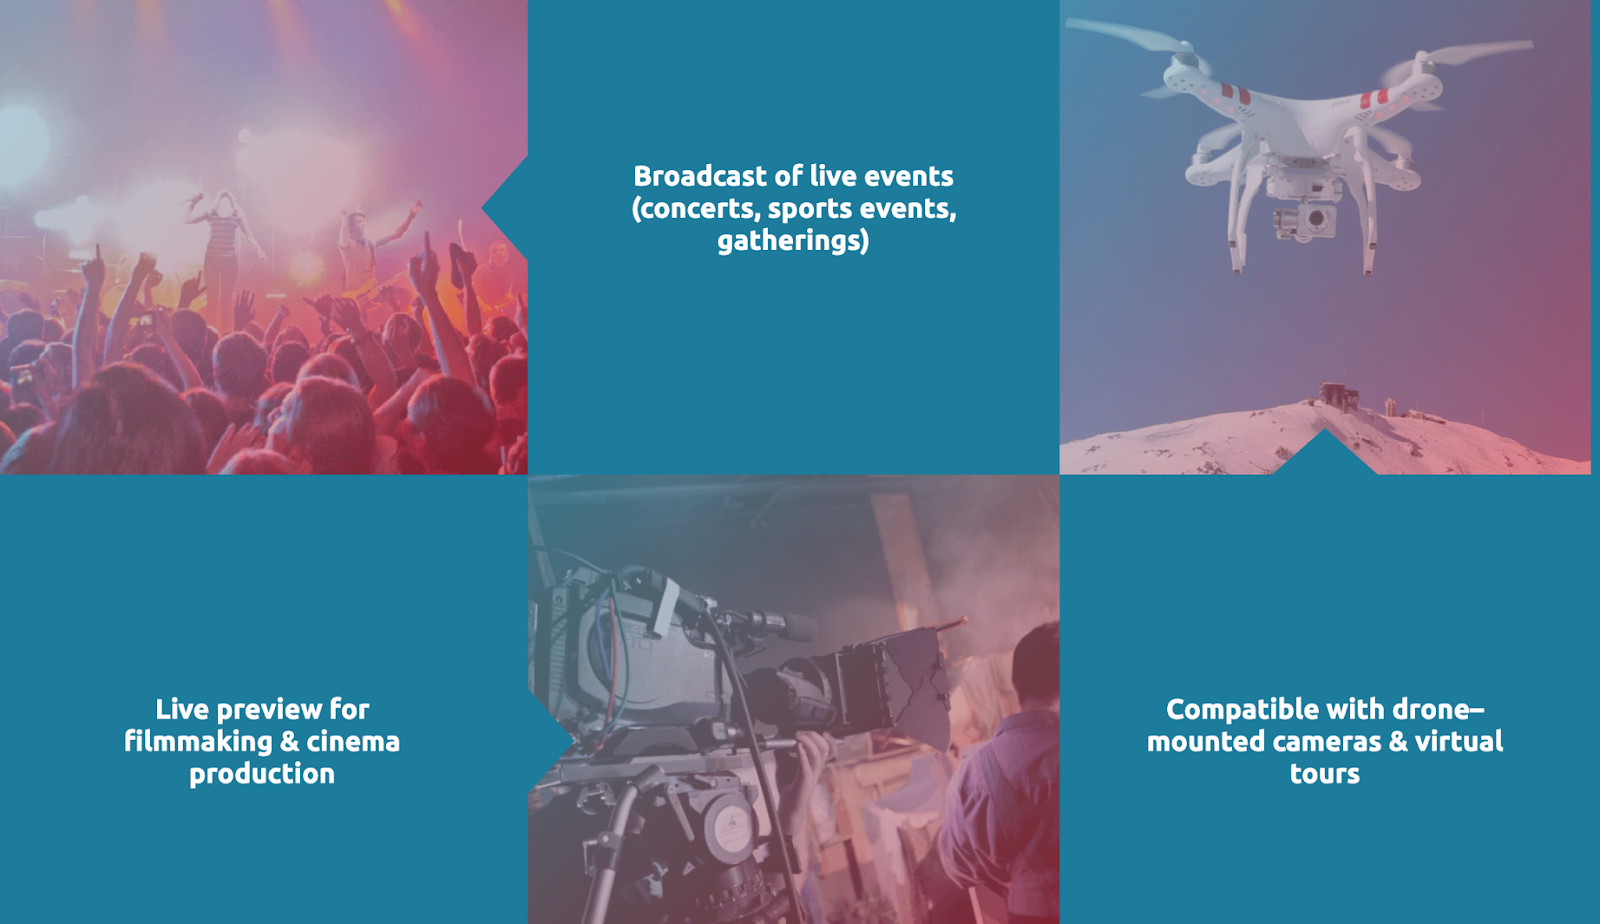 Broadcast of live events (concerts, sports events,
gatherings); Live preview for filmmaking & cinema production; Compatible with drone–mounted cameras & virtual tours